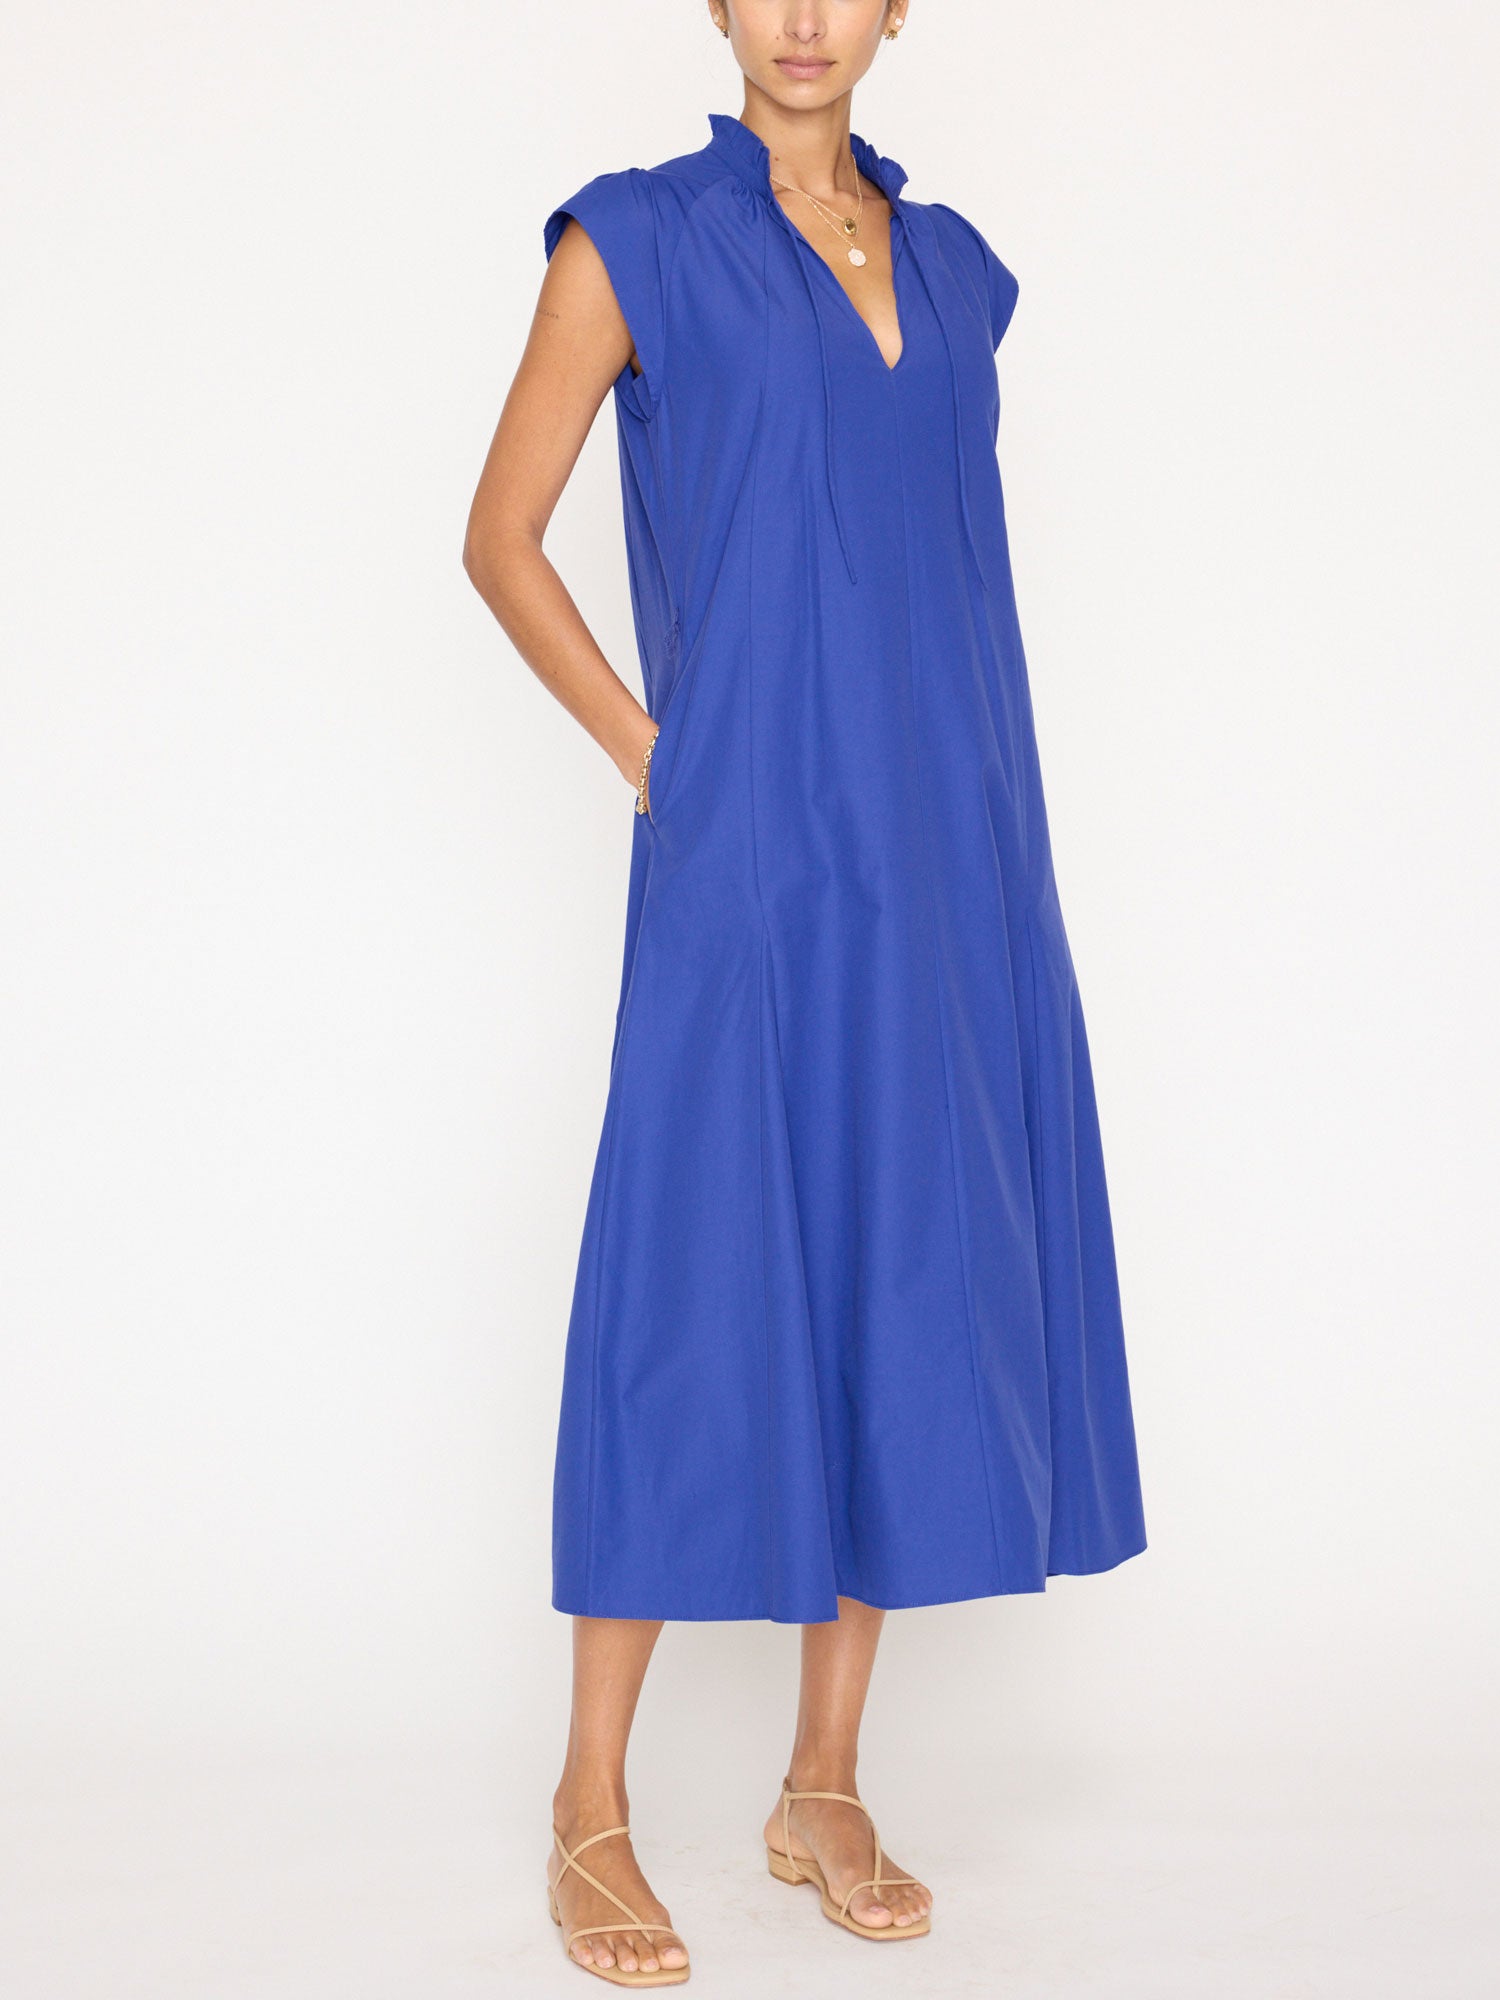 Newport ruffle belted blue midi dress front view 5